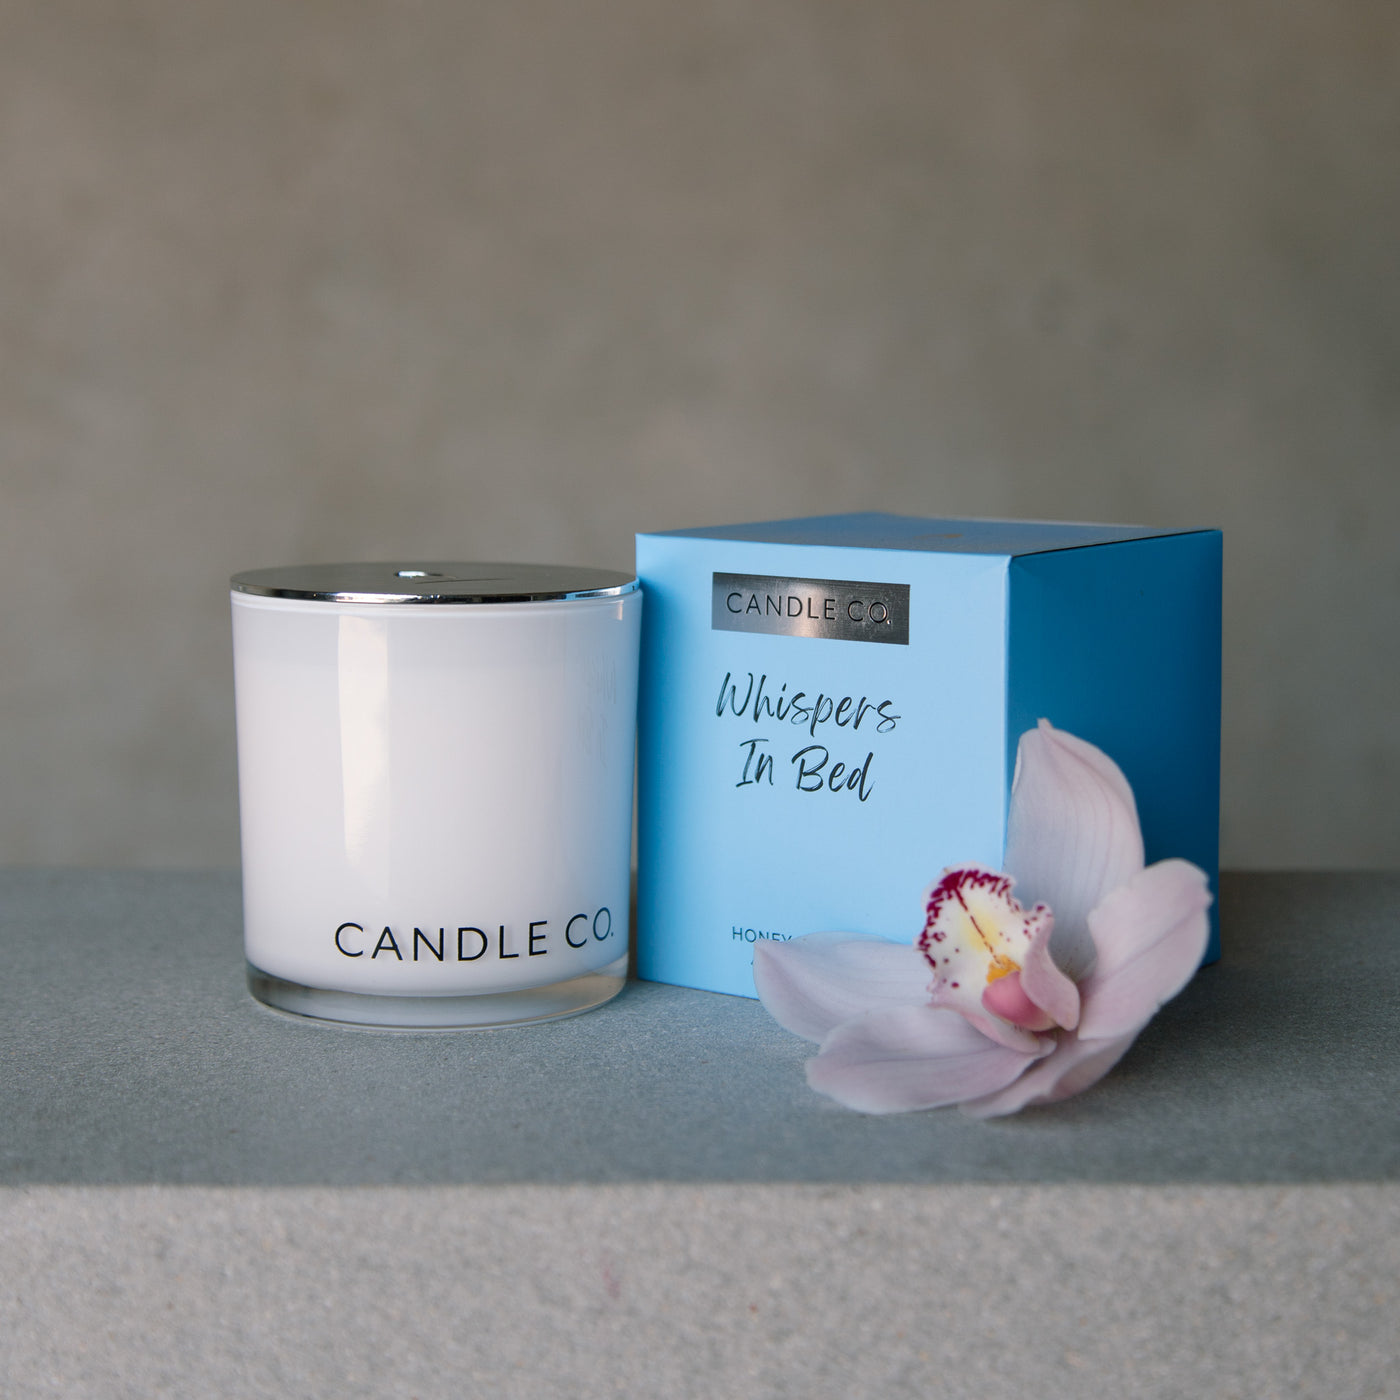 Candle Co Whispers in Bed Honey Tabacco 400g Scented Candle Light Blue